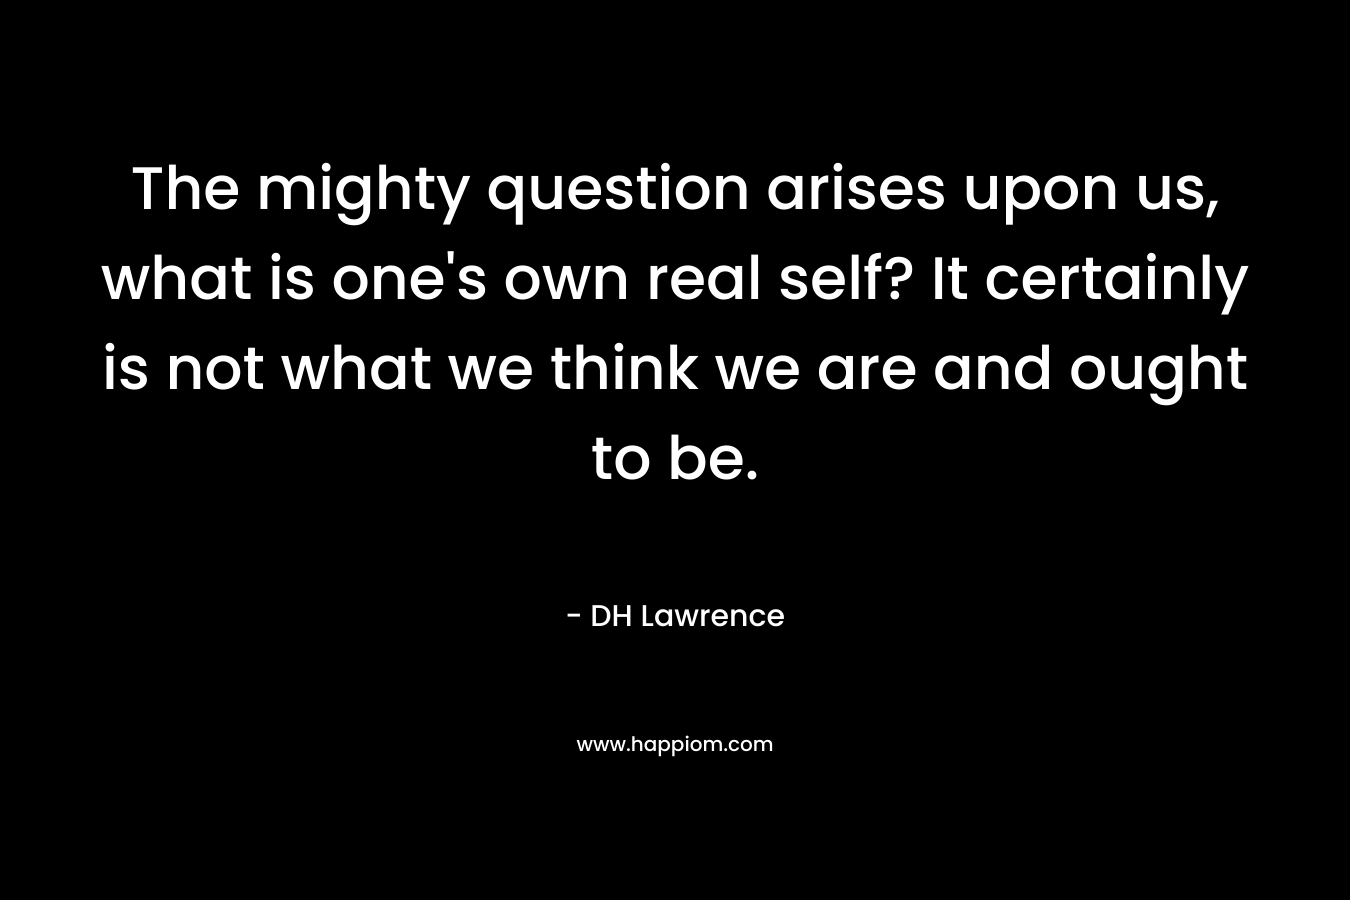 The mighty question arises upon us, what is one's own real self? It certainly is not what we think we are and ought to be.